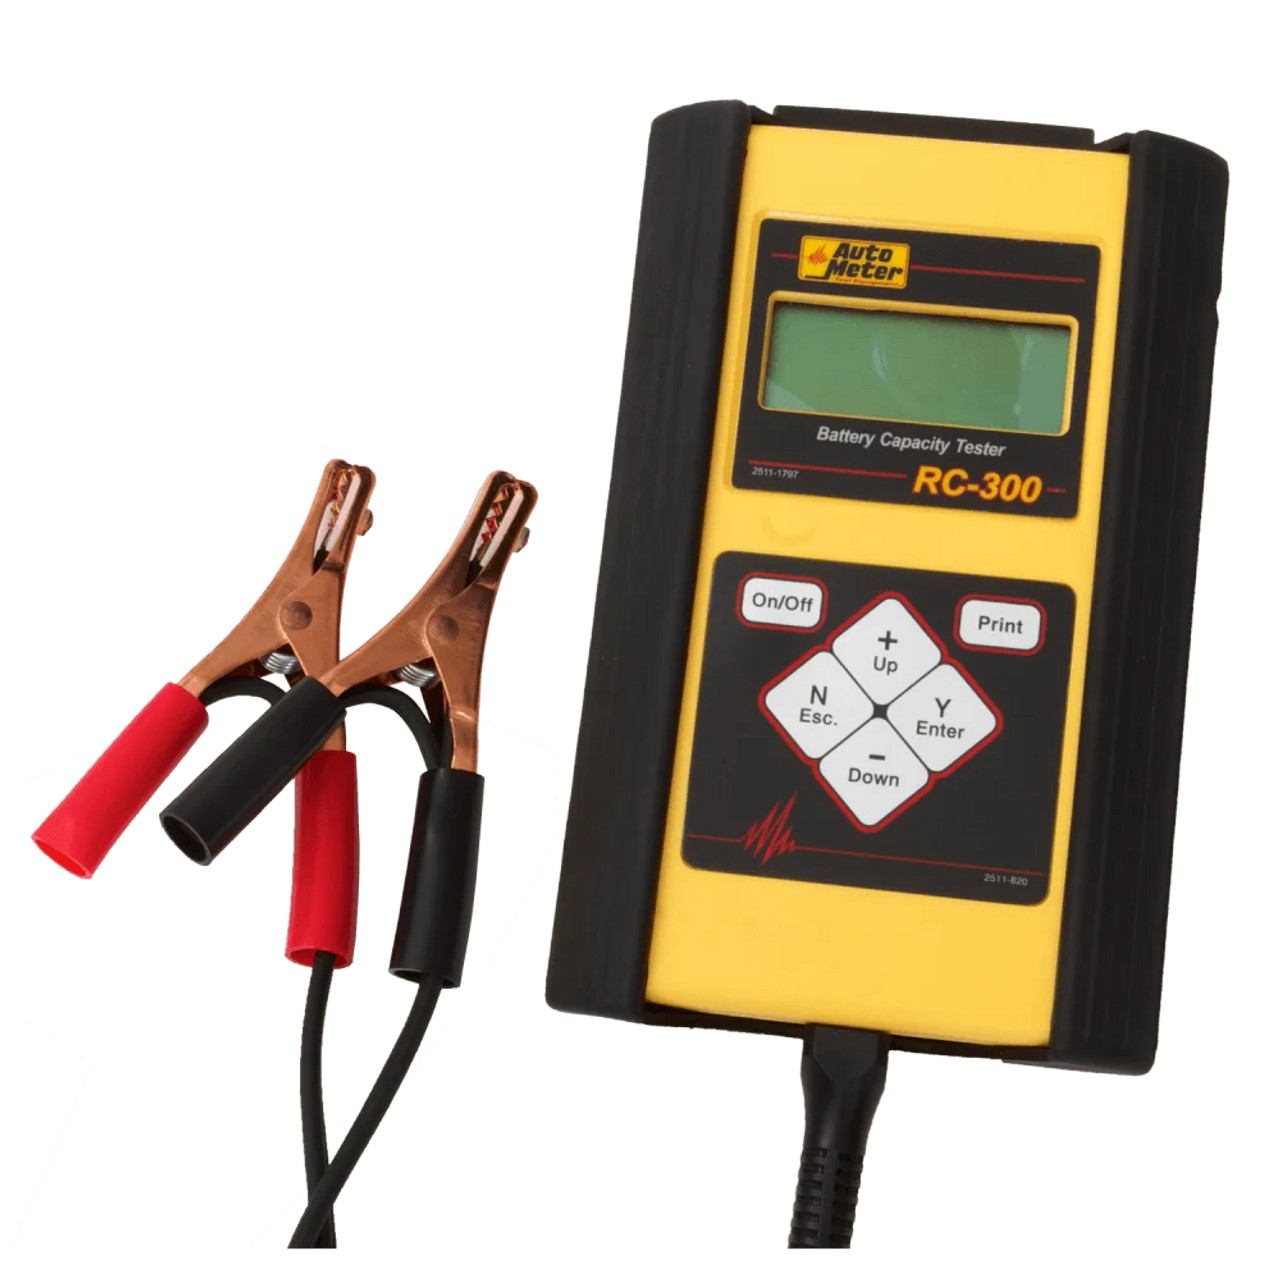 Auto Meter Rc-300 Technician Grade Intelligent Handheld SLA and Standby  Battery Tester for 6v & 12 Applications